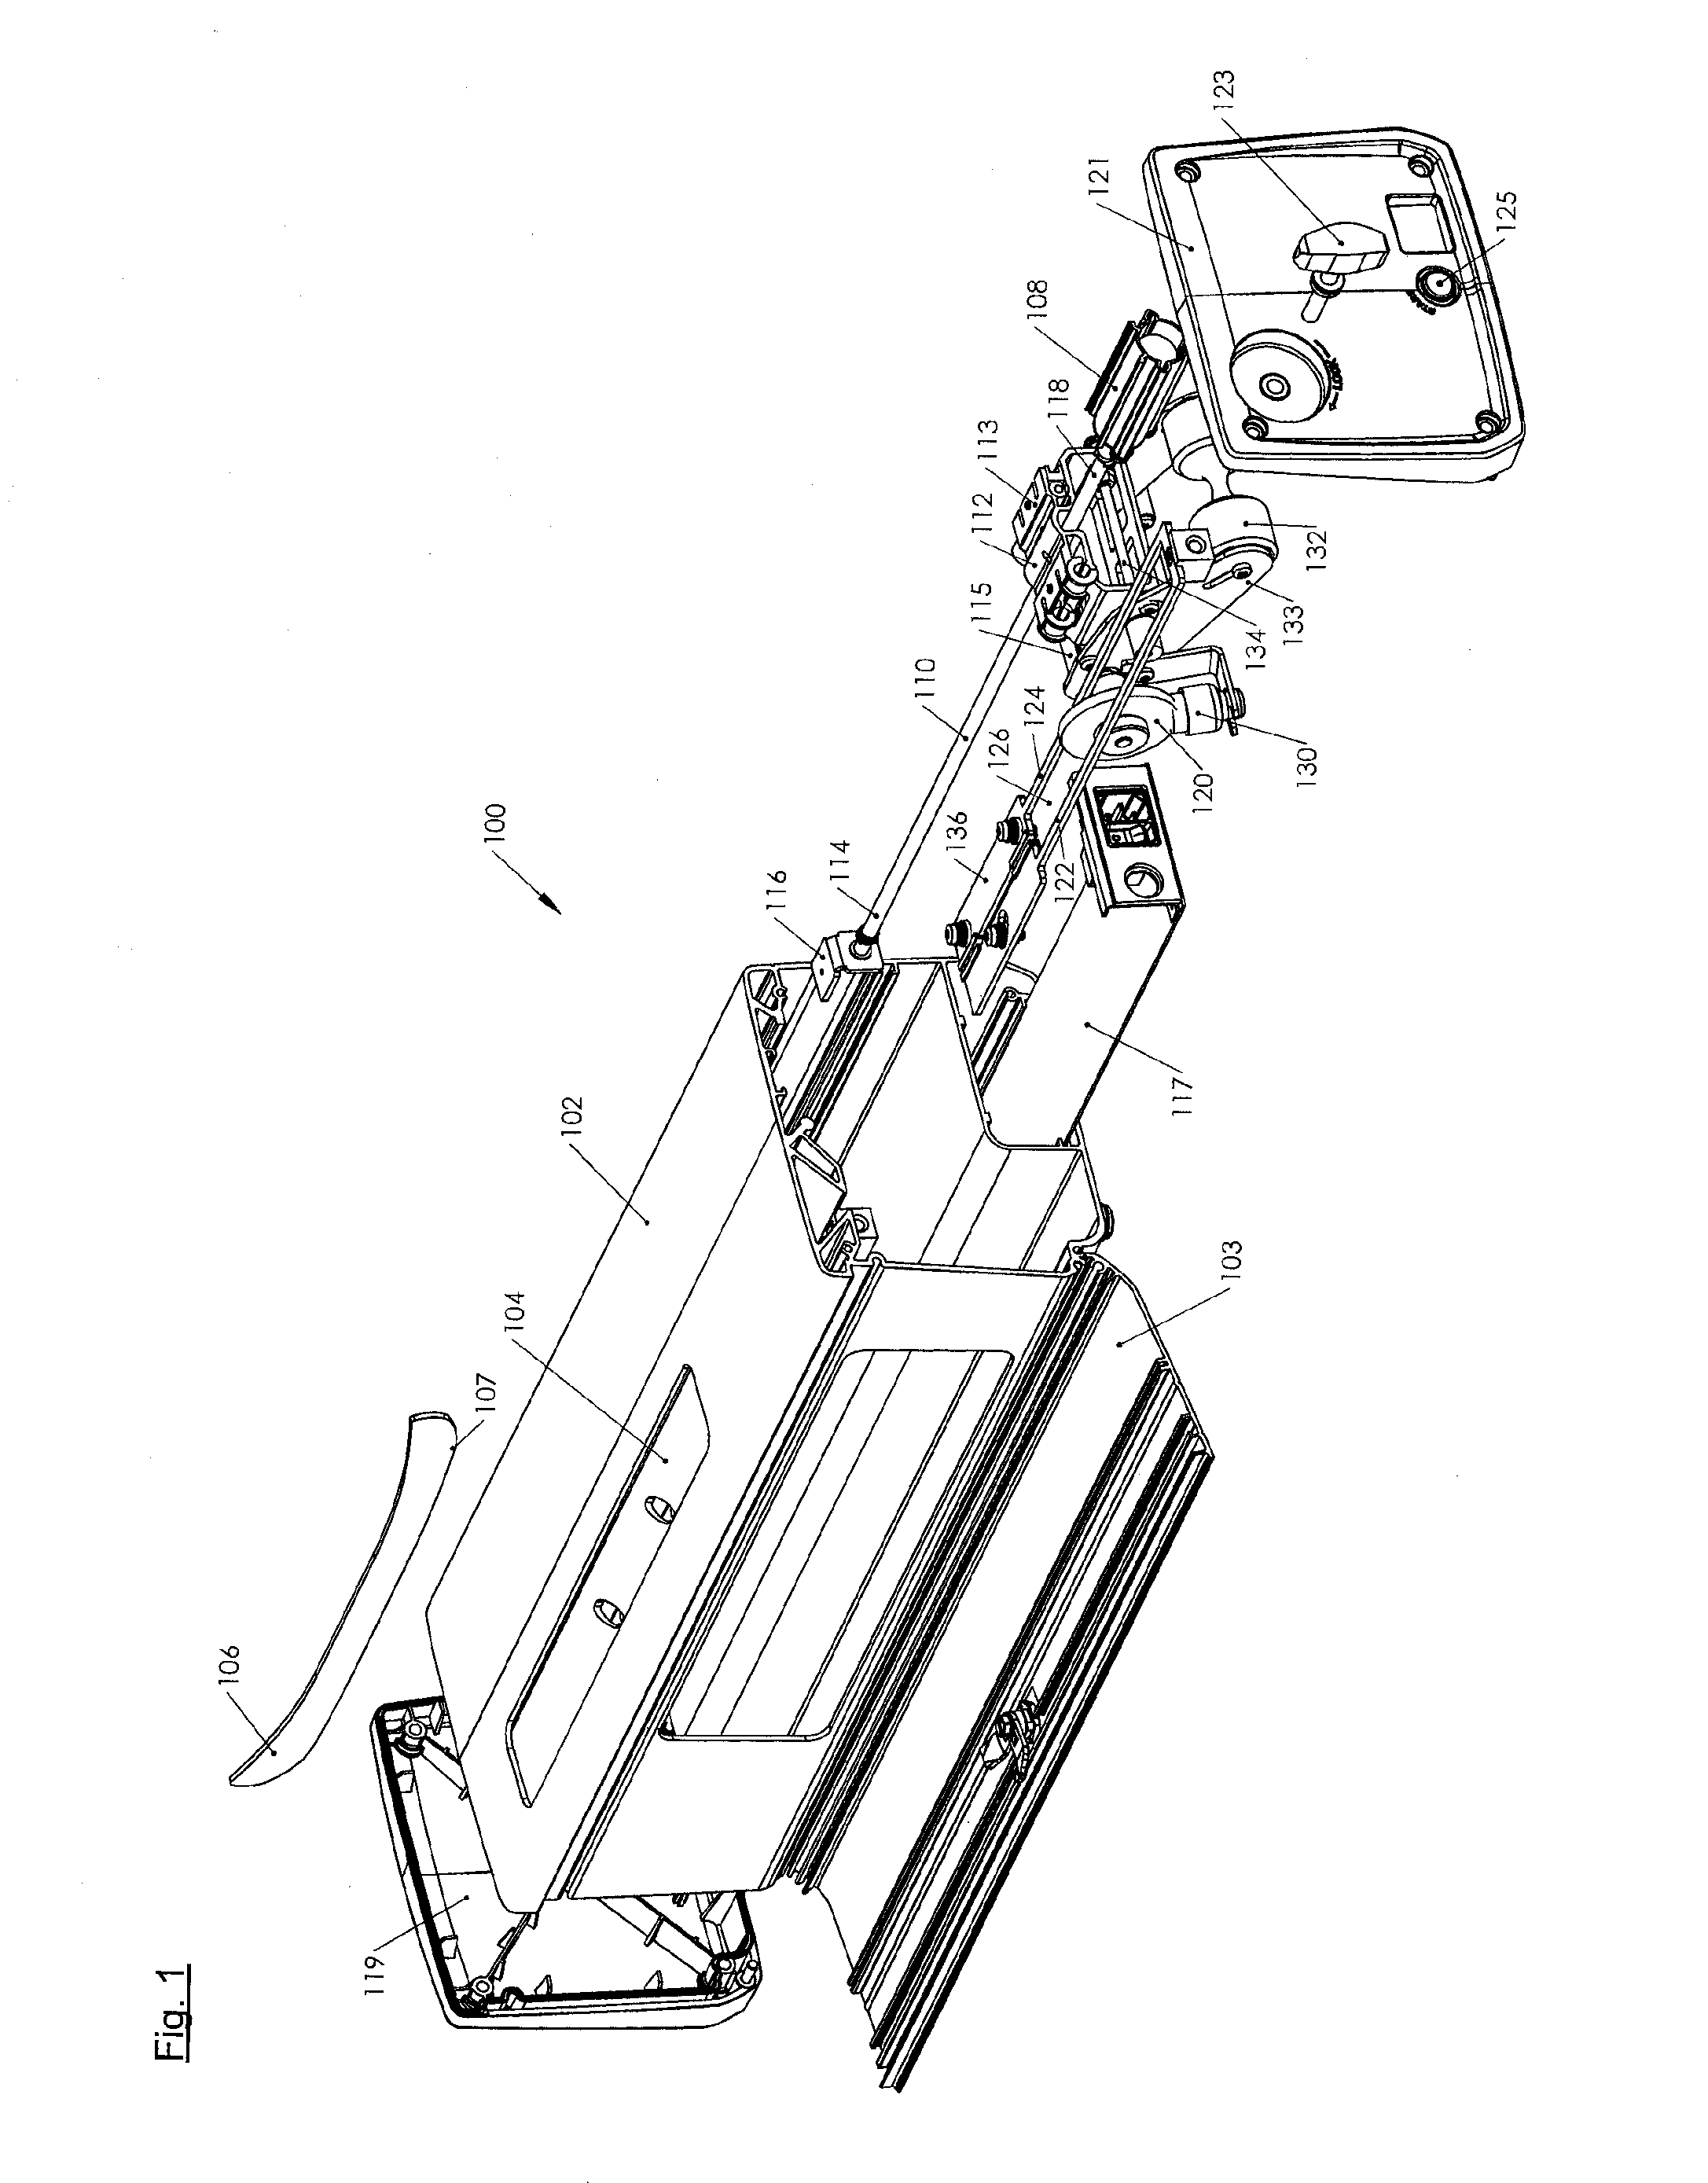 Method for automatic sharpening of a blade